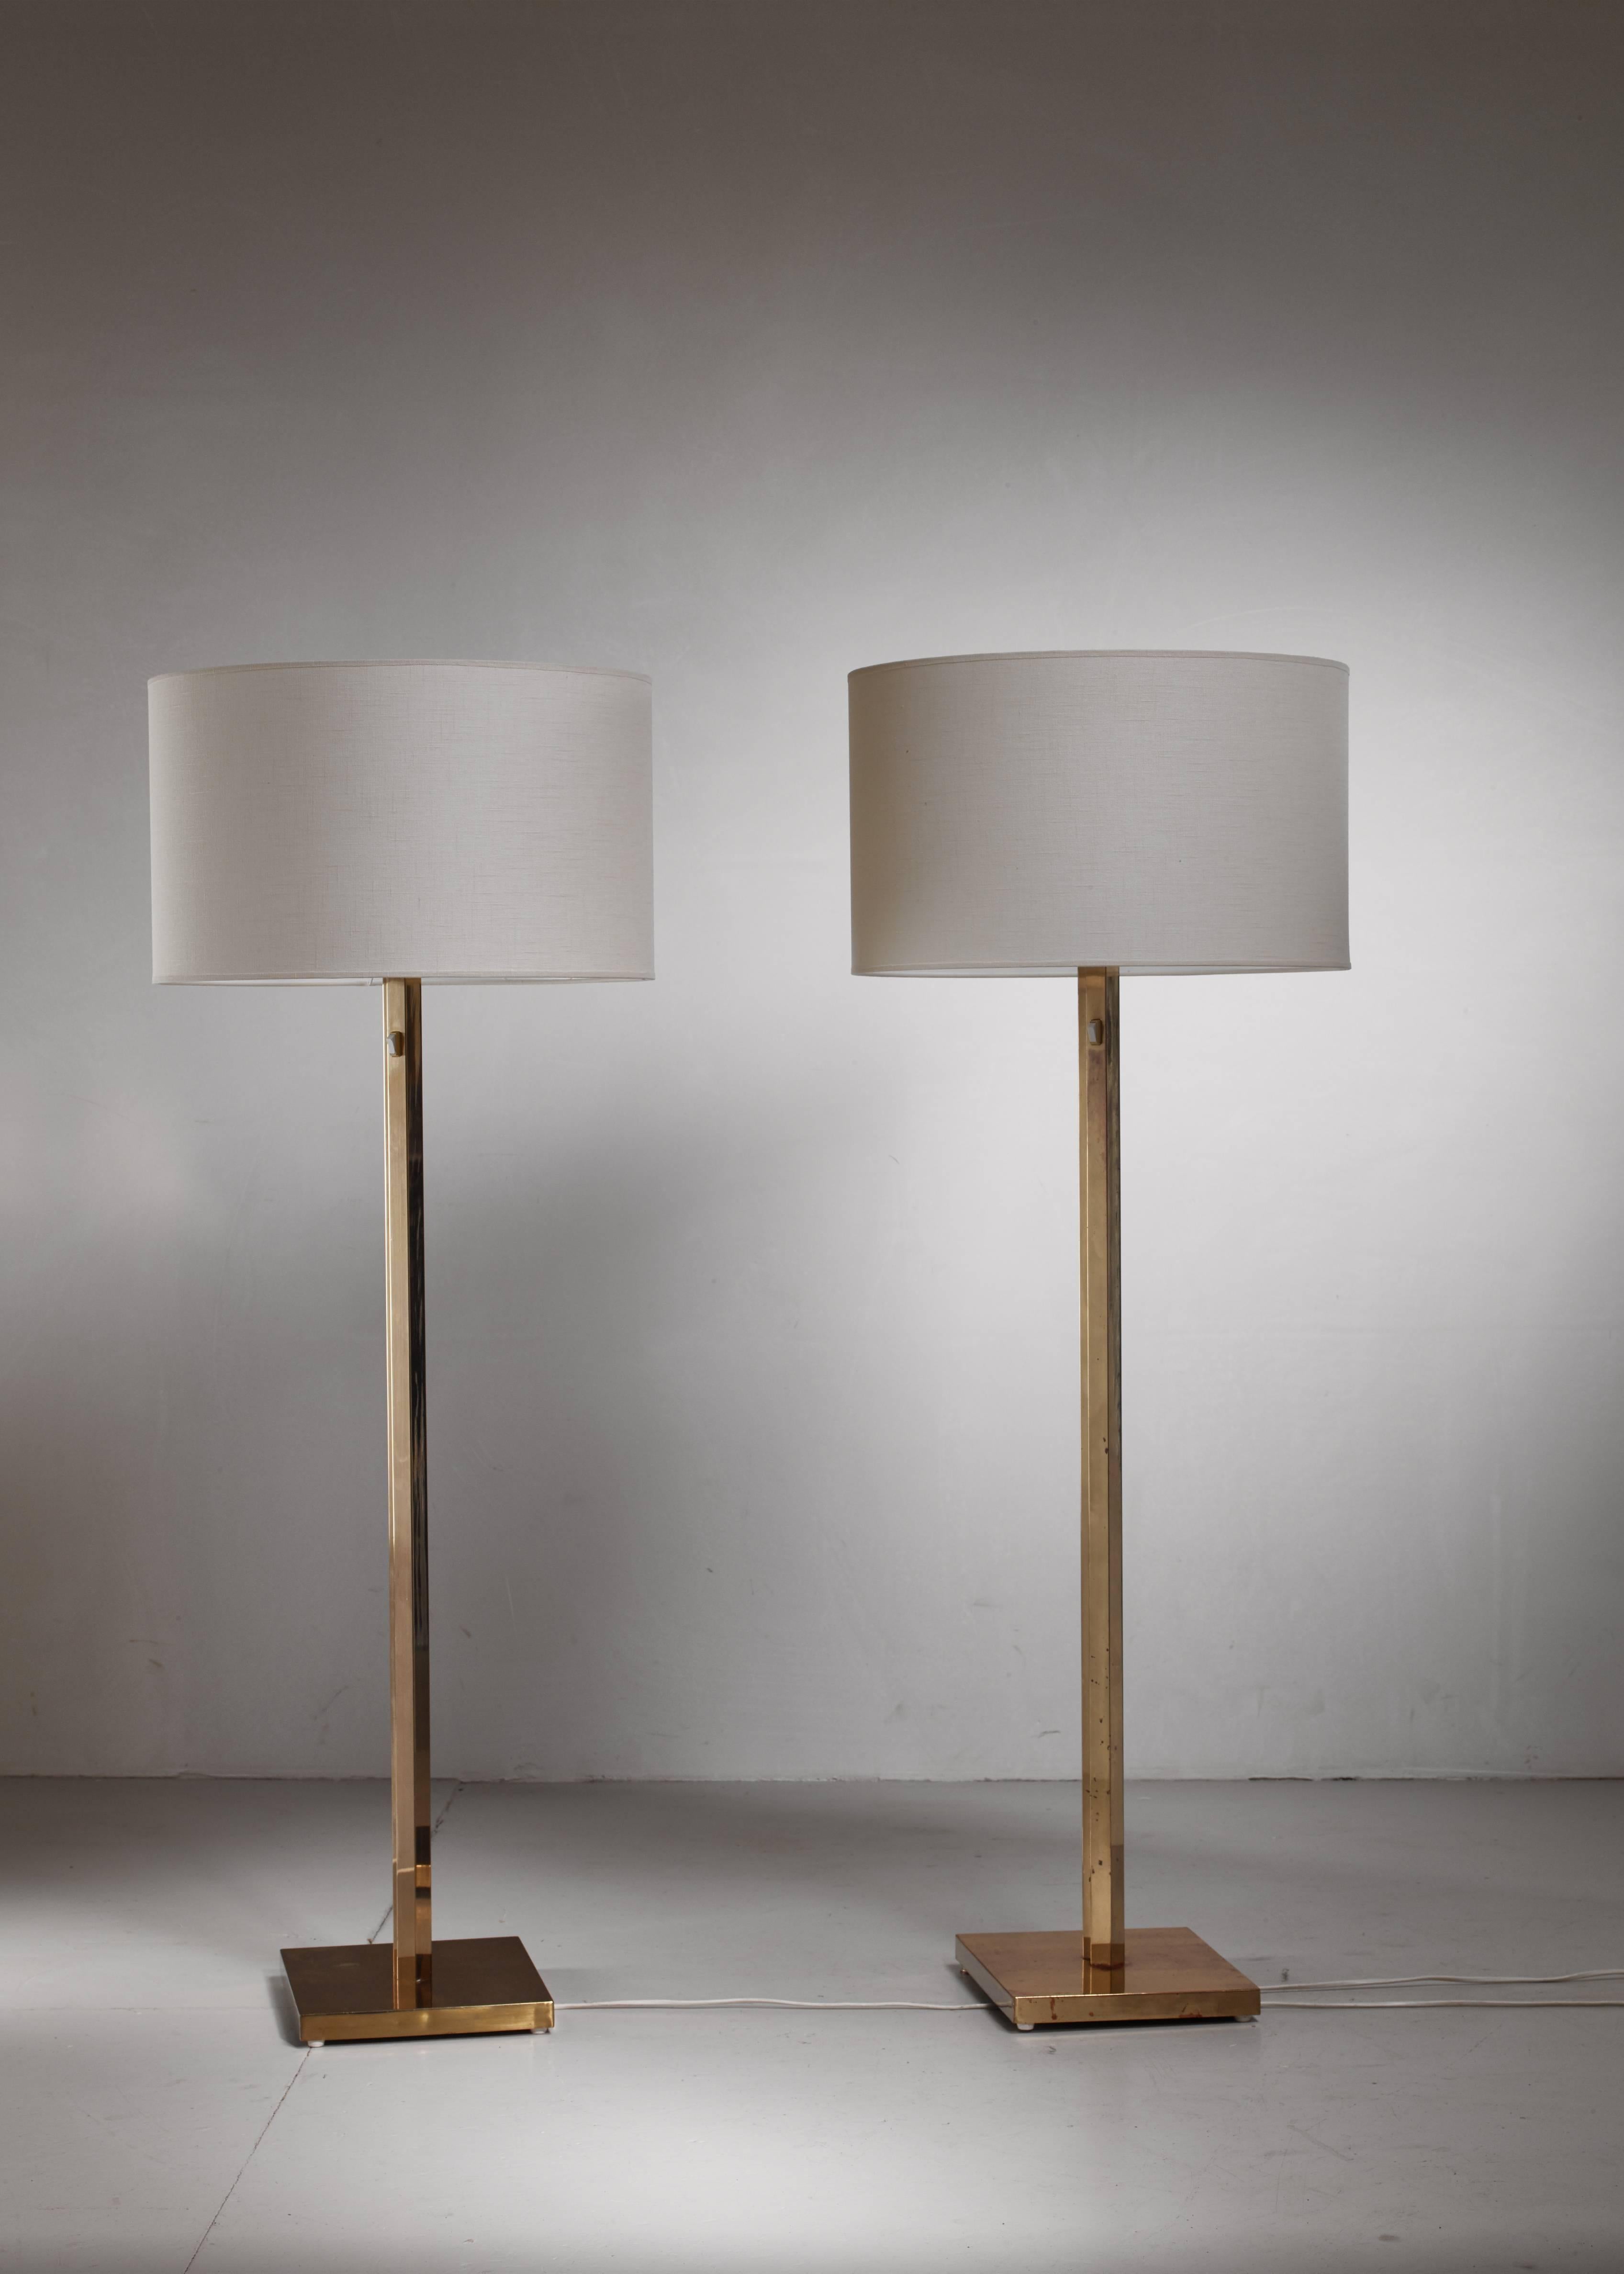 A pair of brass floor lamps by Bergboms, Sweden. The stem has an interesting shape, made of two square stems, connecting at the corners. Light switch at the top of the stem.

Labeled by Bergboms and age related wear on the stems. The measurements